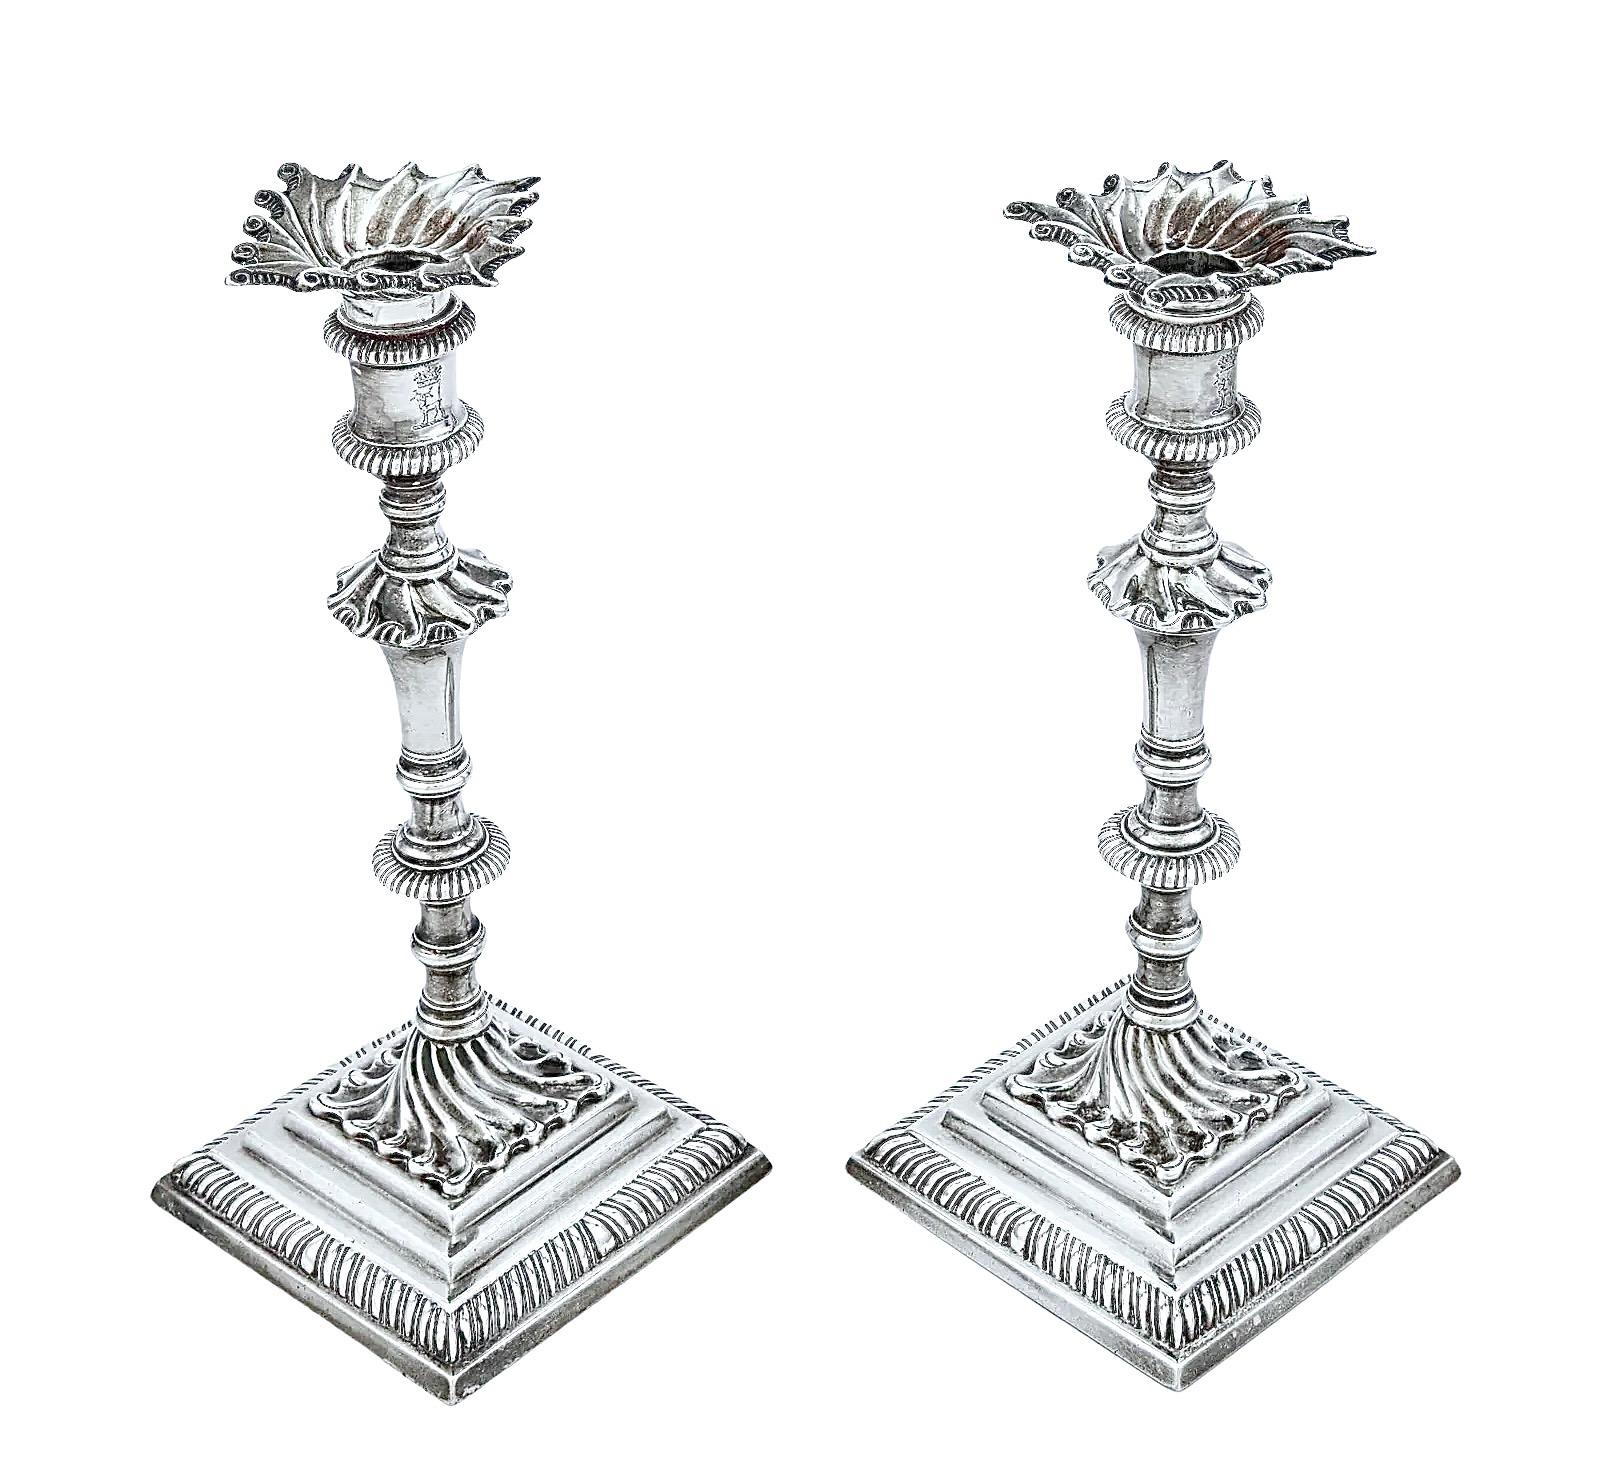 Introducing an exceptional pair of George III sterling silver candlesticks, meticulously created in 1763 by the skilled silversmith William Café. These candlesticks stand as a testament to the timeless elegance and craftsmanship of the Georgian